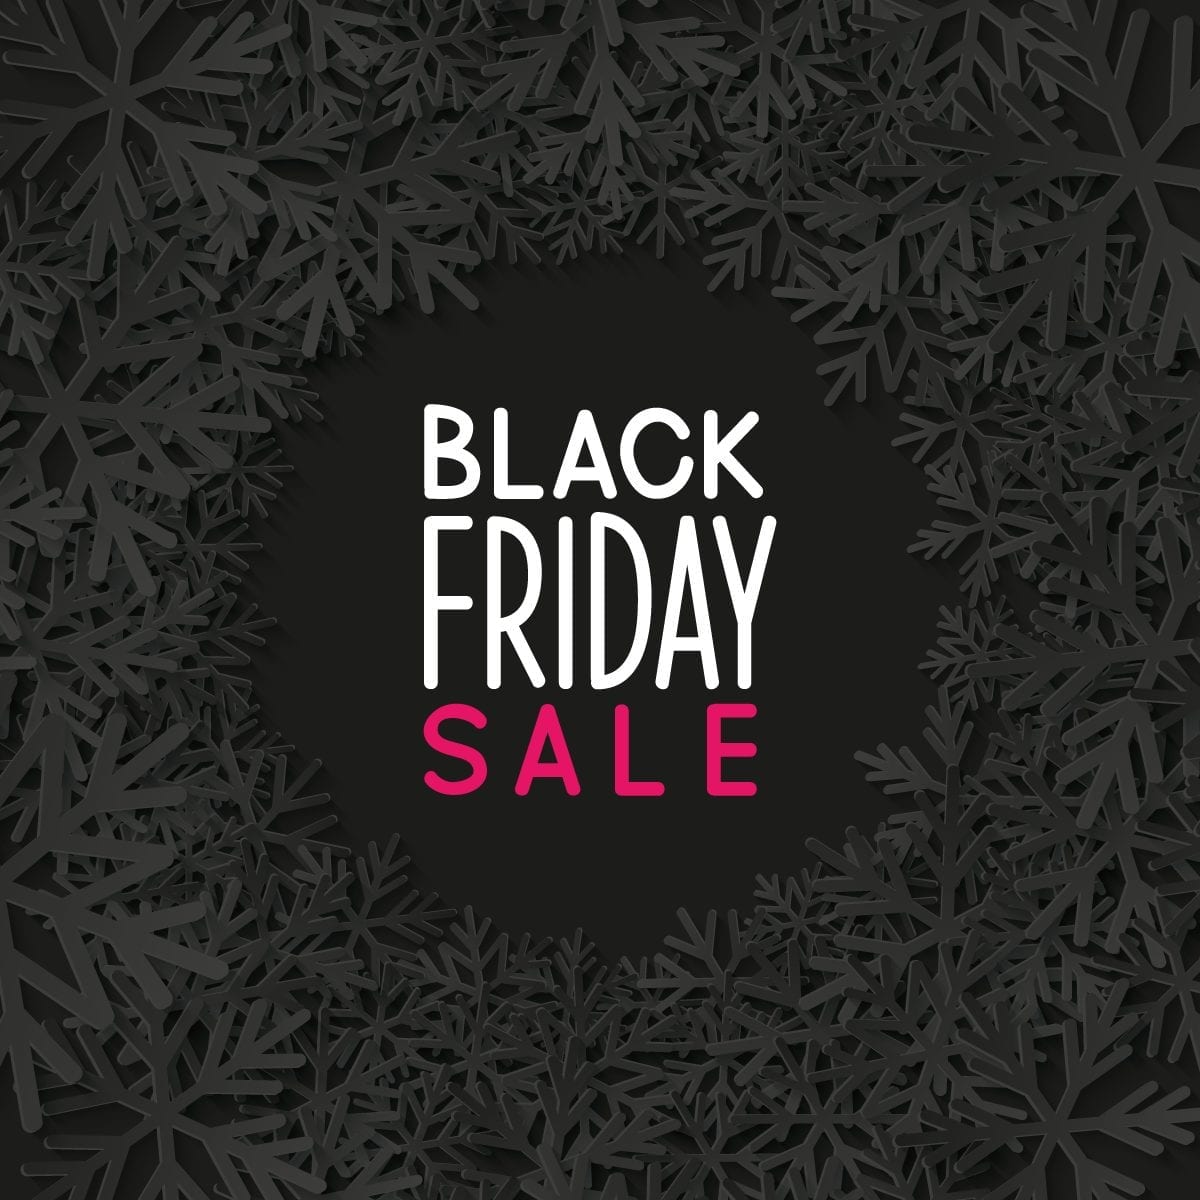 pink-is-the-new-black-black-friday-deals-from-obrien-media.png